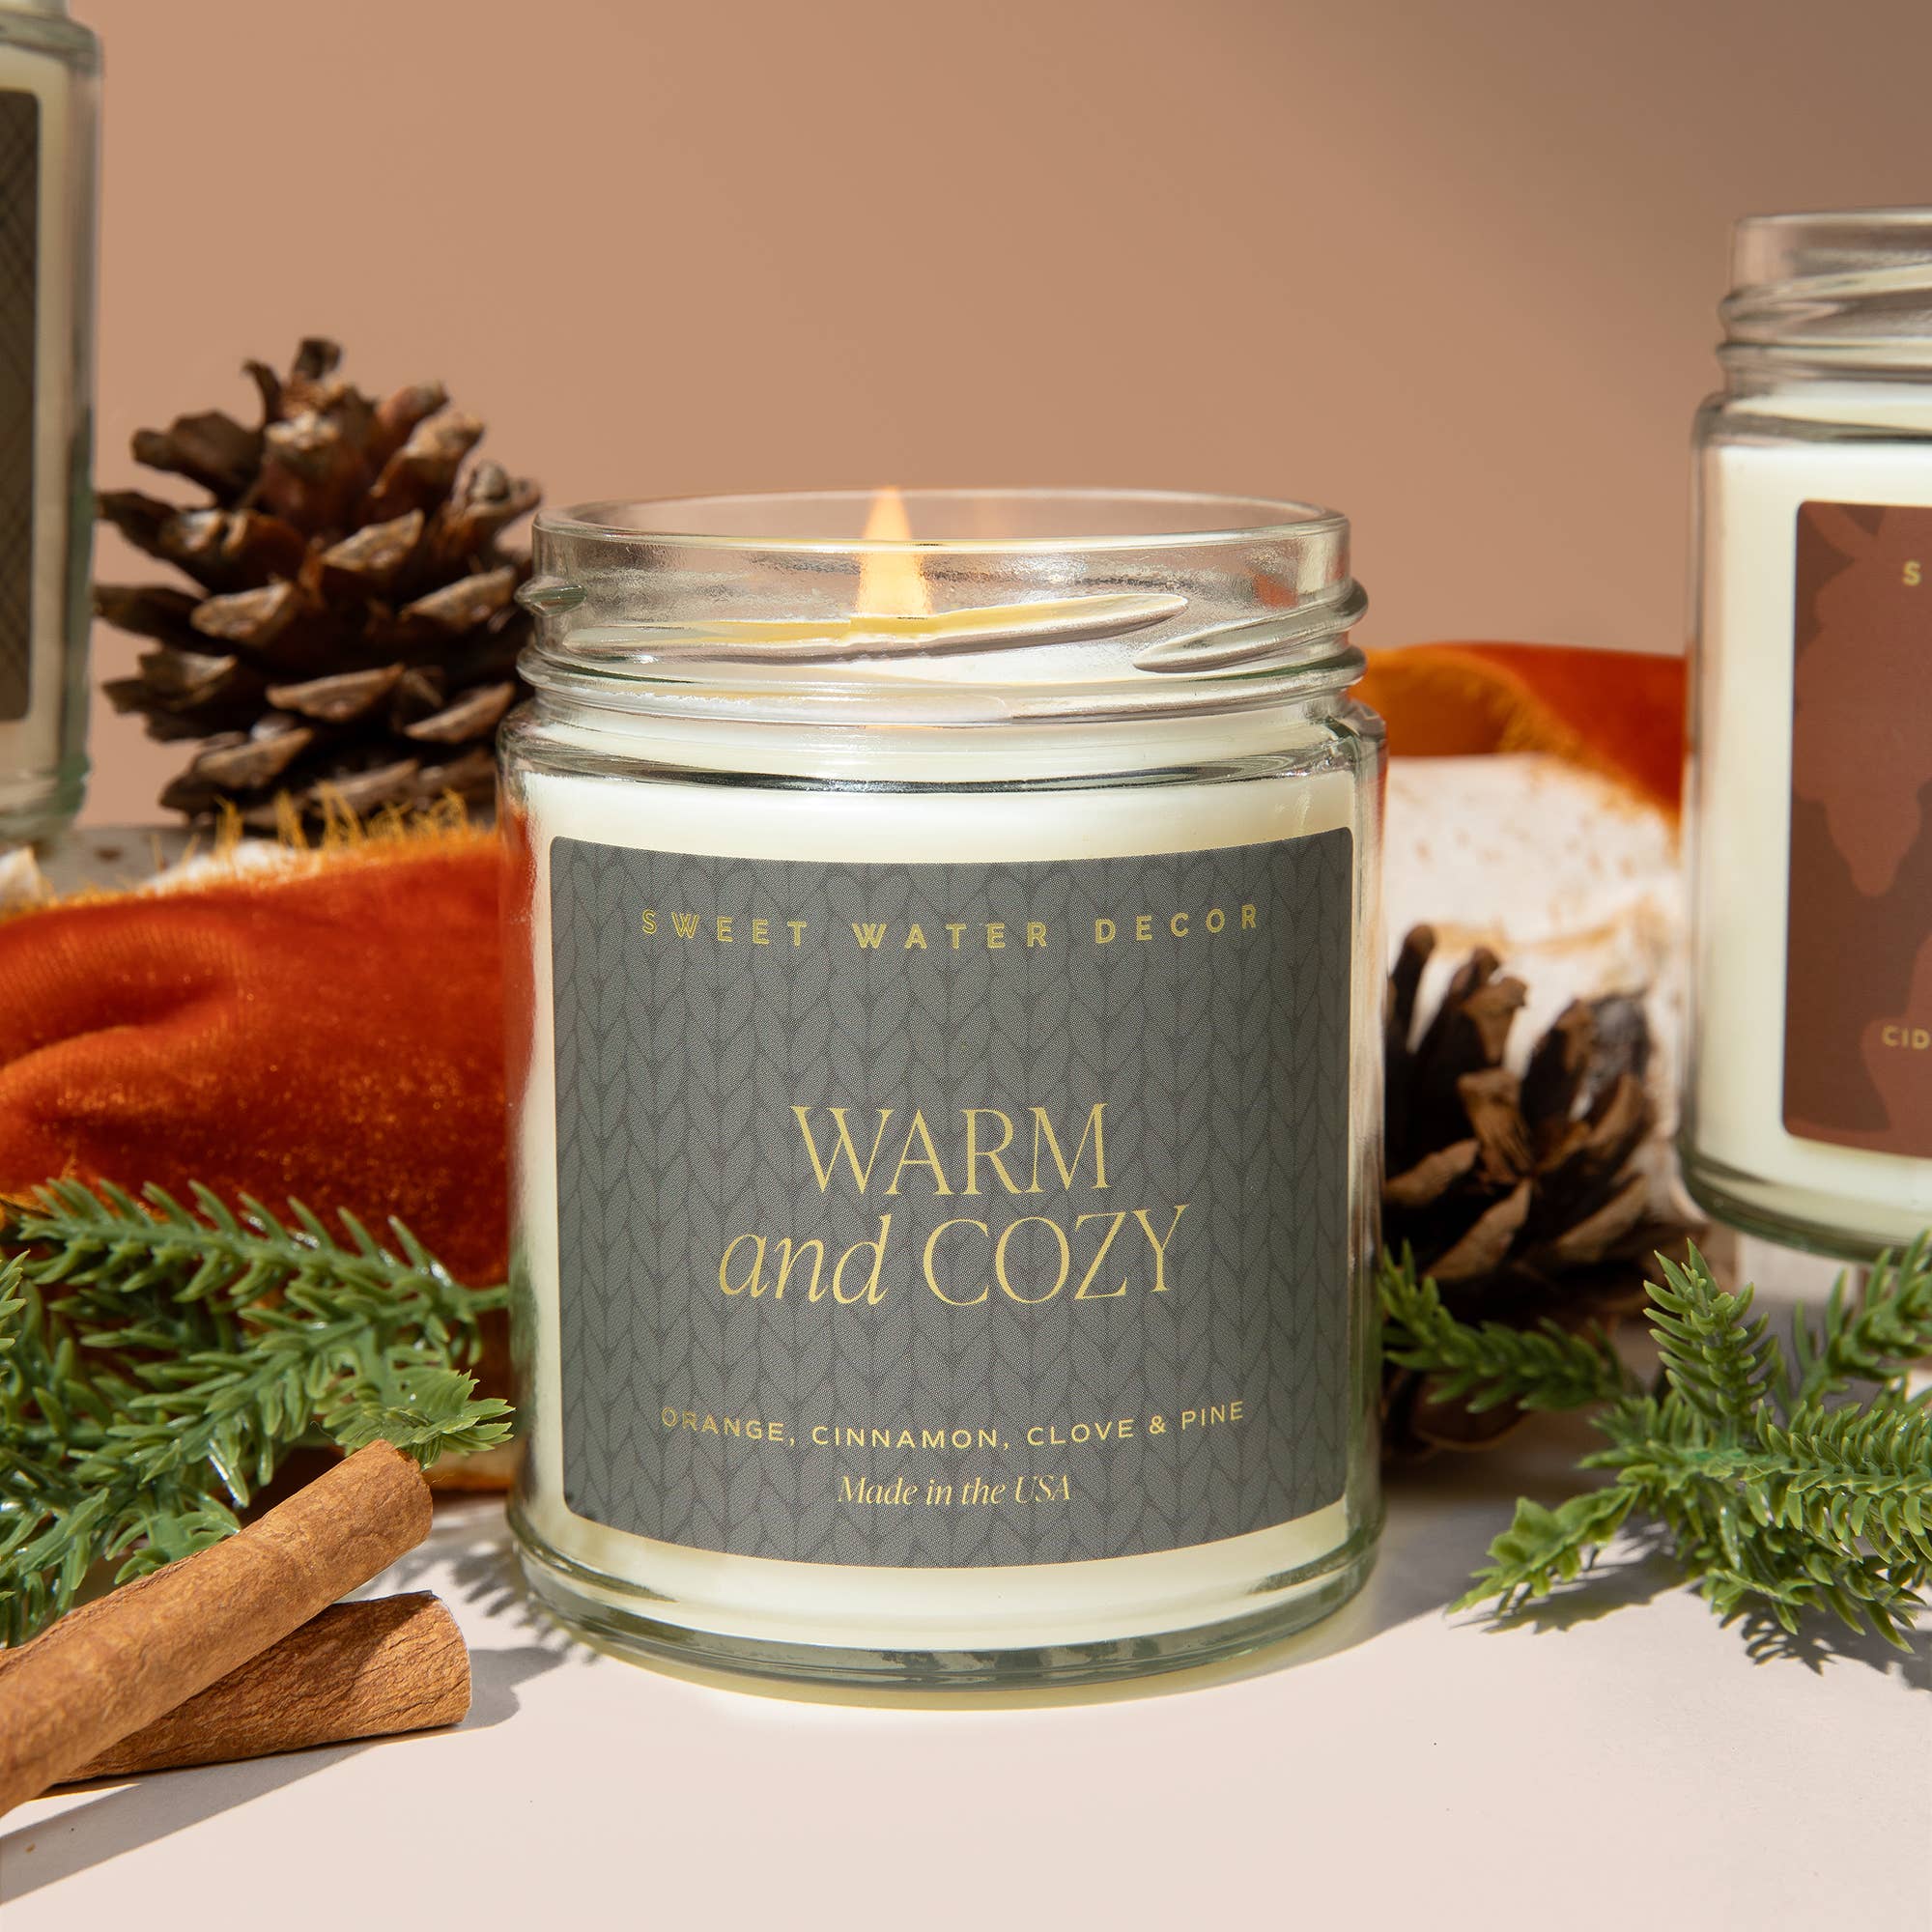 *NEW* Warm and Cozy 9 oz Soy Candle - Home Decor & Gifts